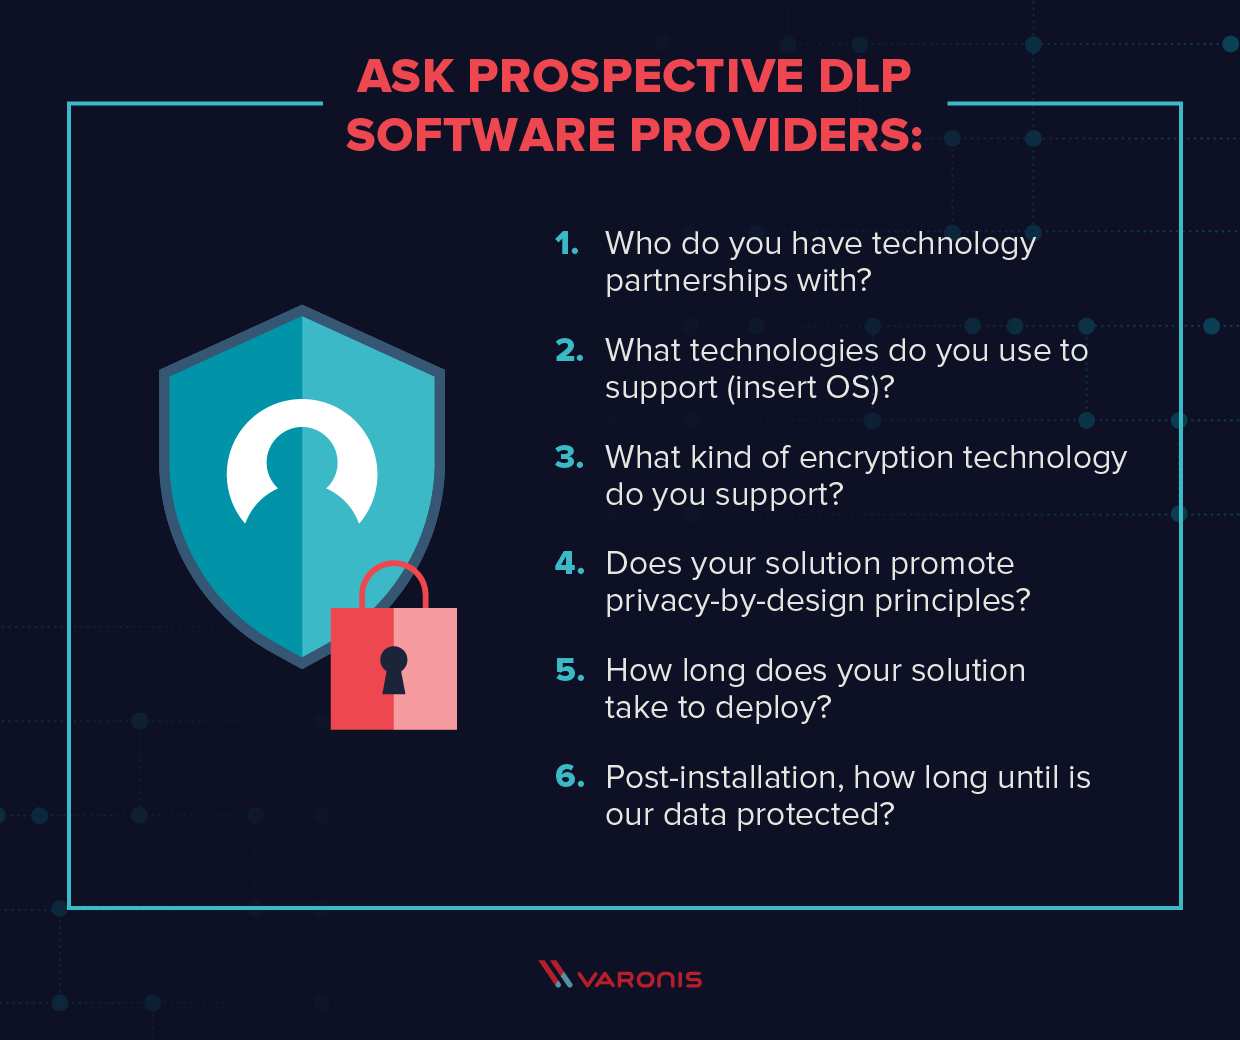 Questions to ask DLP software providers